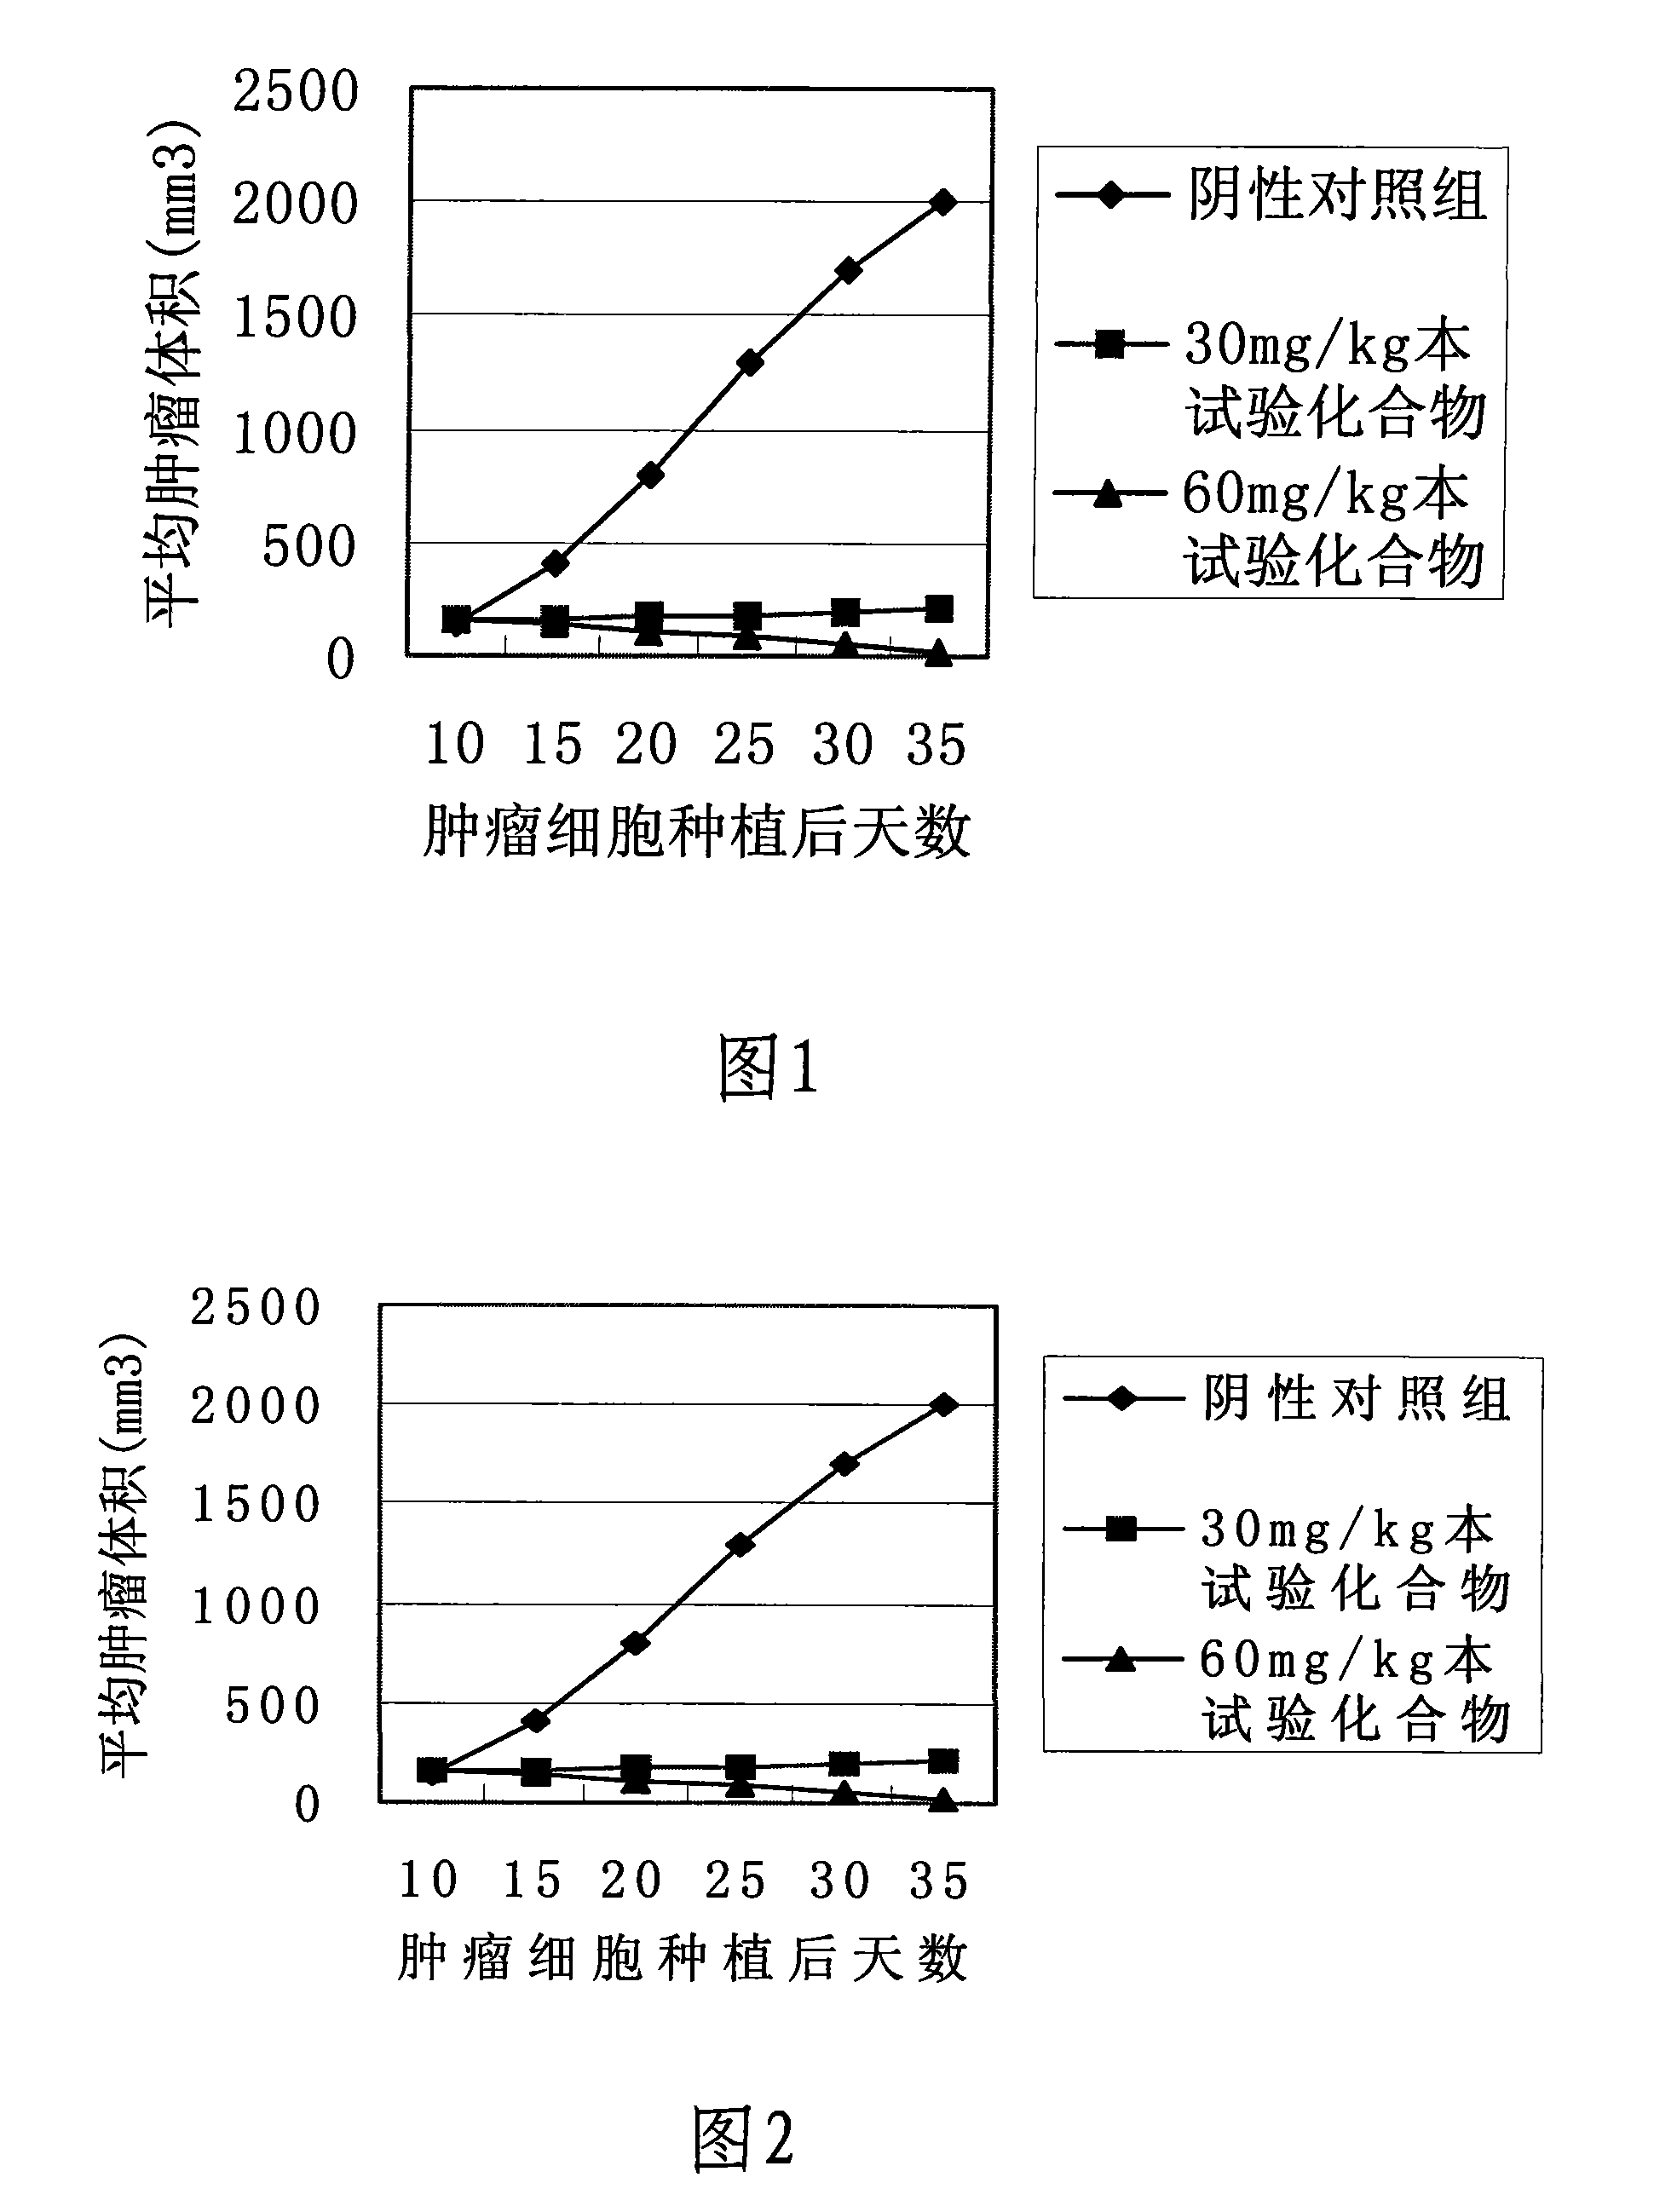 Anti-cancer drug compounds and method for synthesizing same